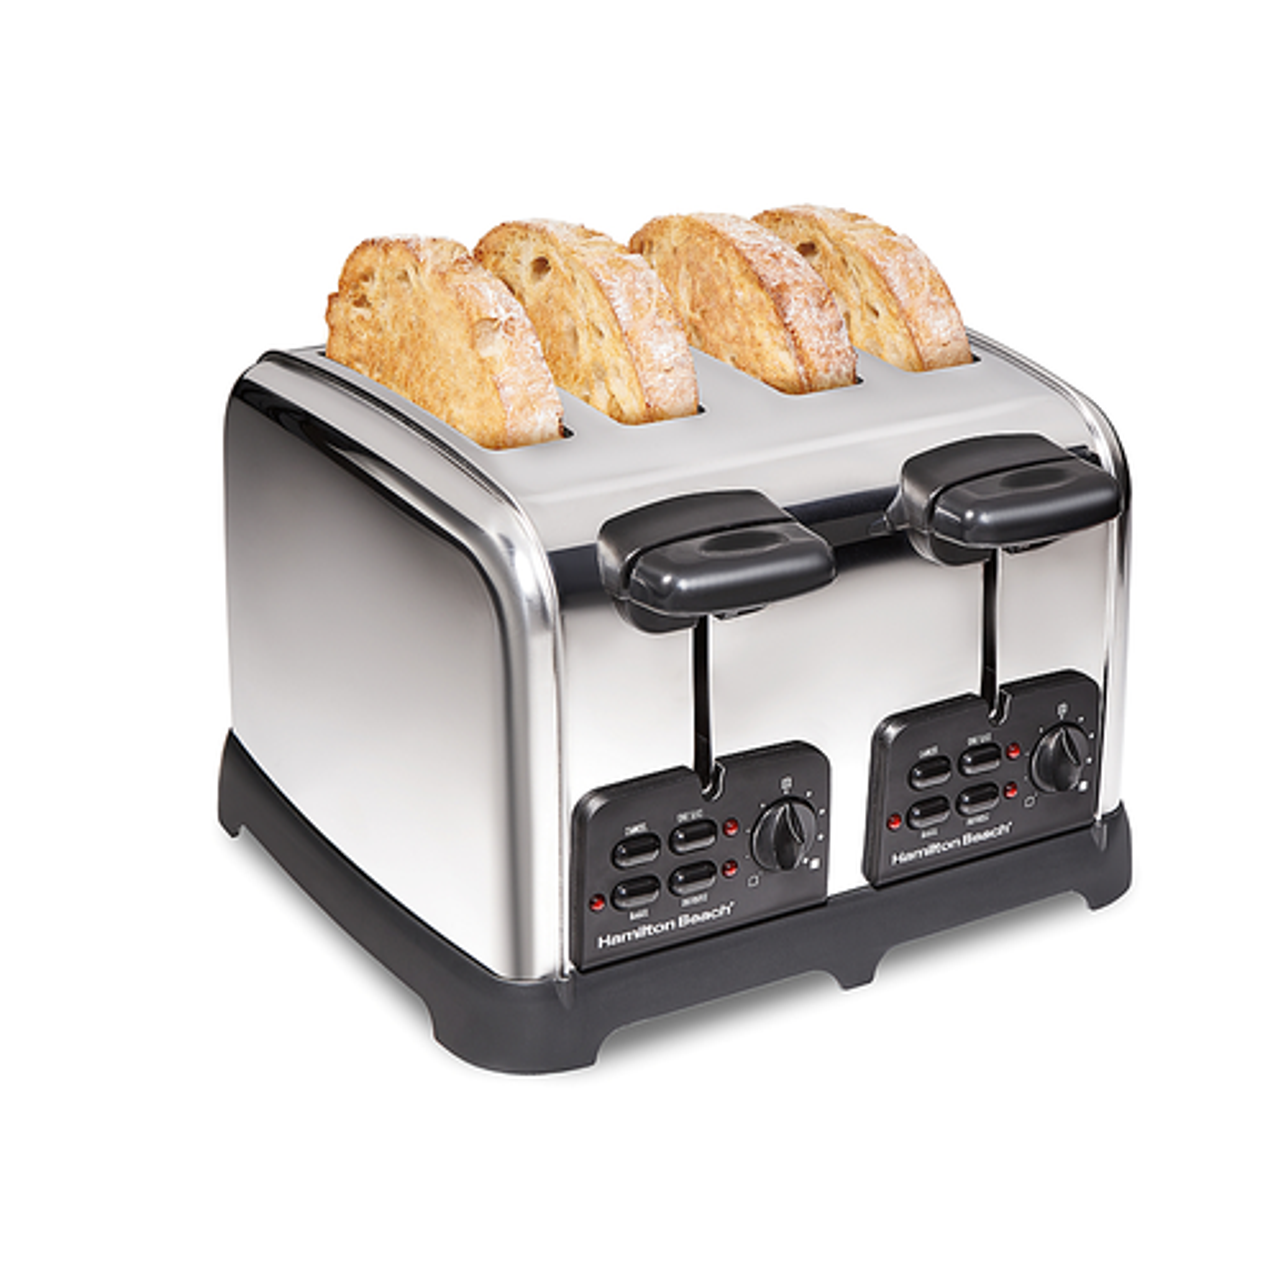 Hamilton Beach Classic 4 Slice Toaster with Sure-Toast Technology - STAINLESS STEEL